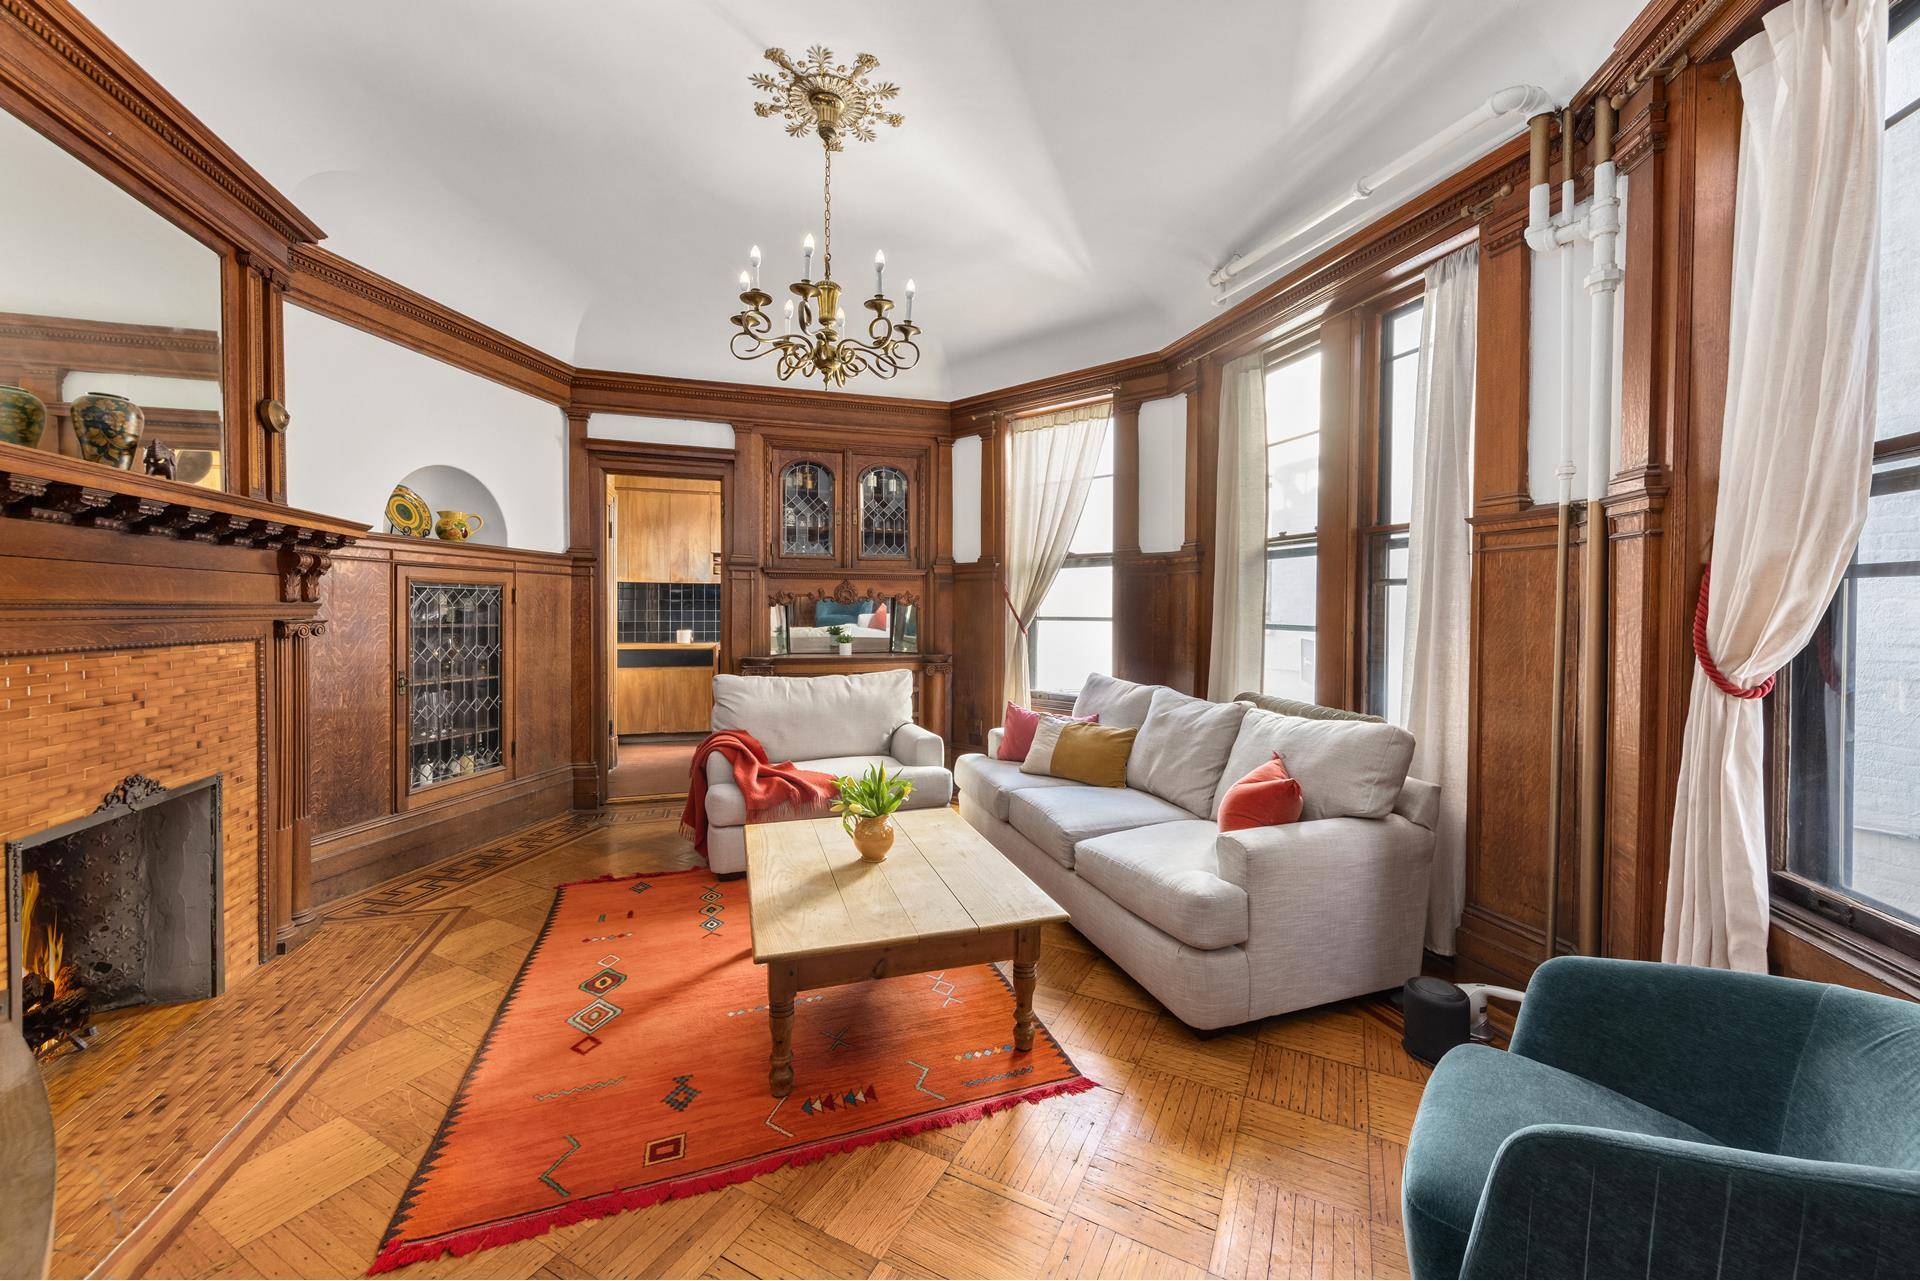 Spacious, sunny and bright best describes apartment two at 120 Prospect Park West.